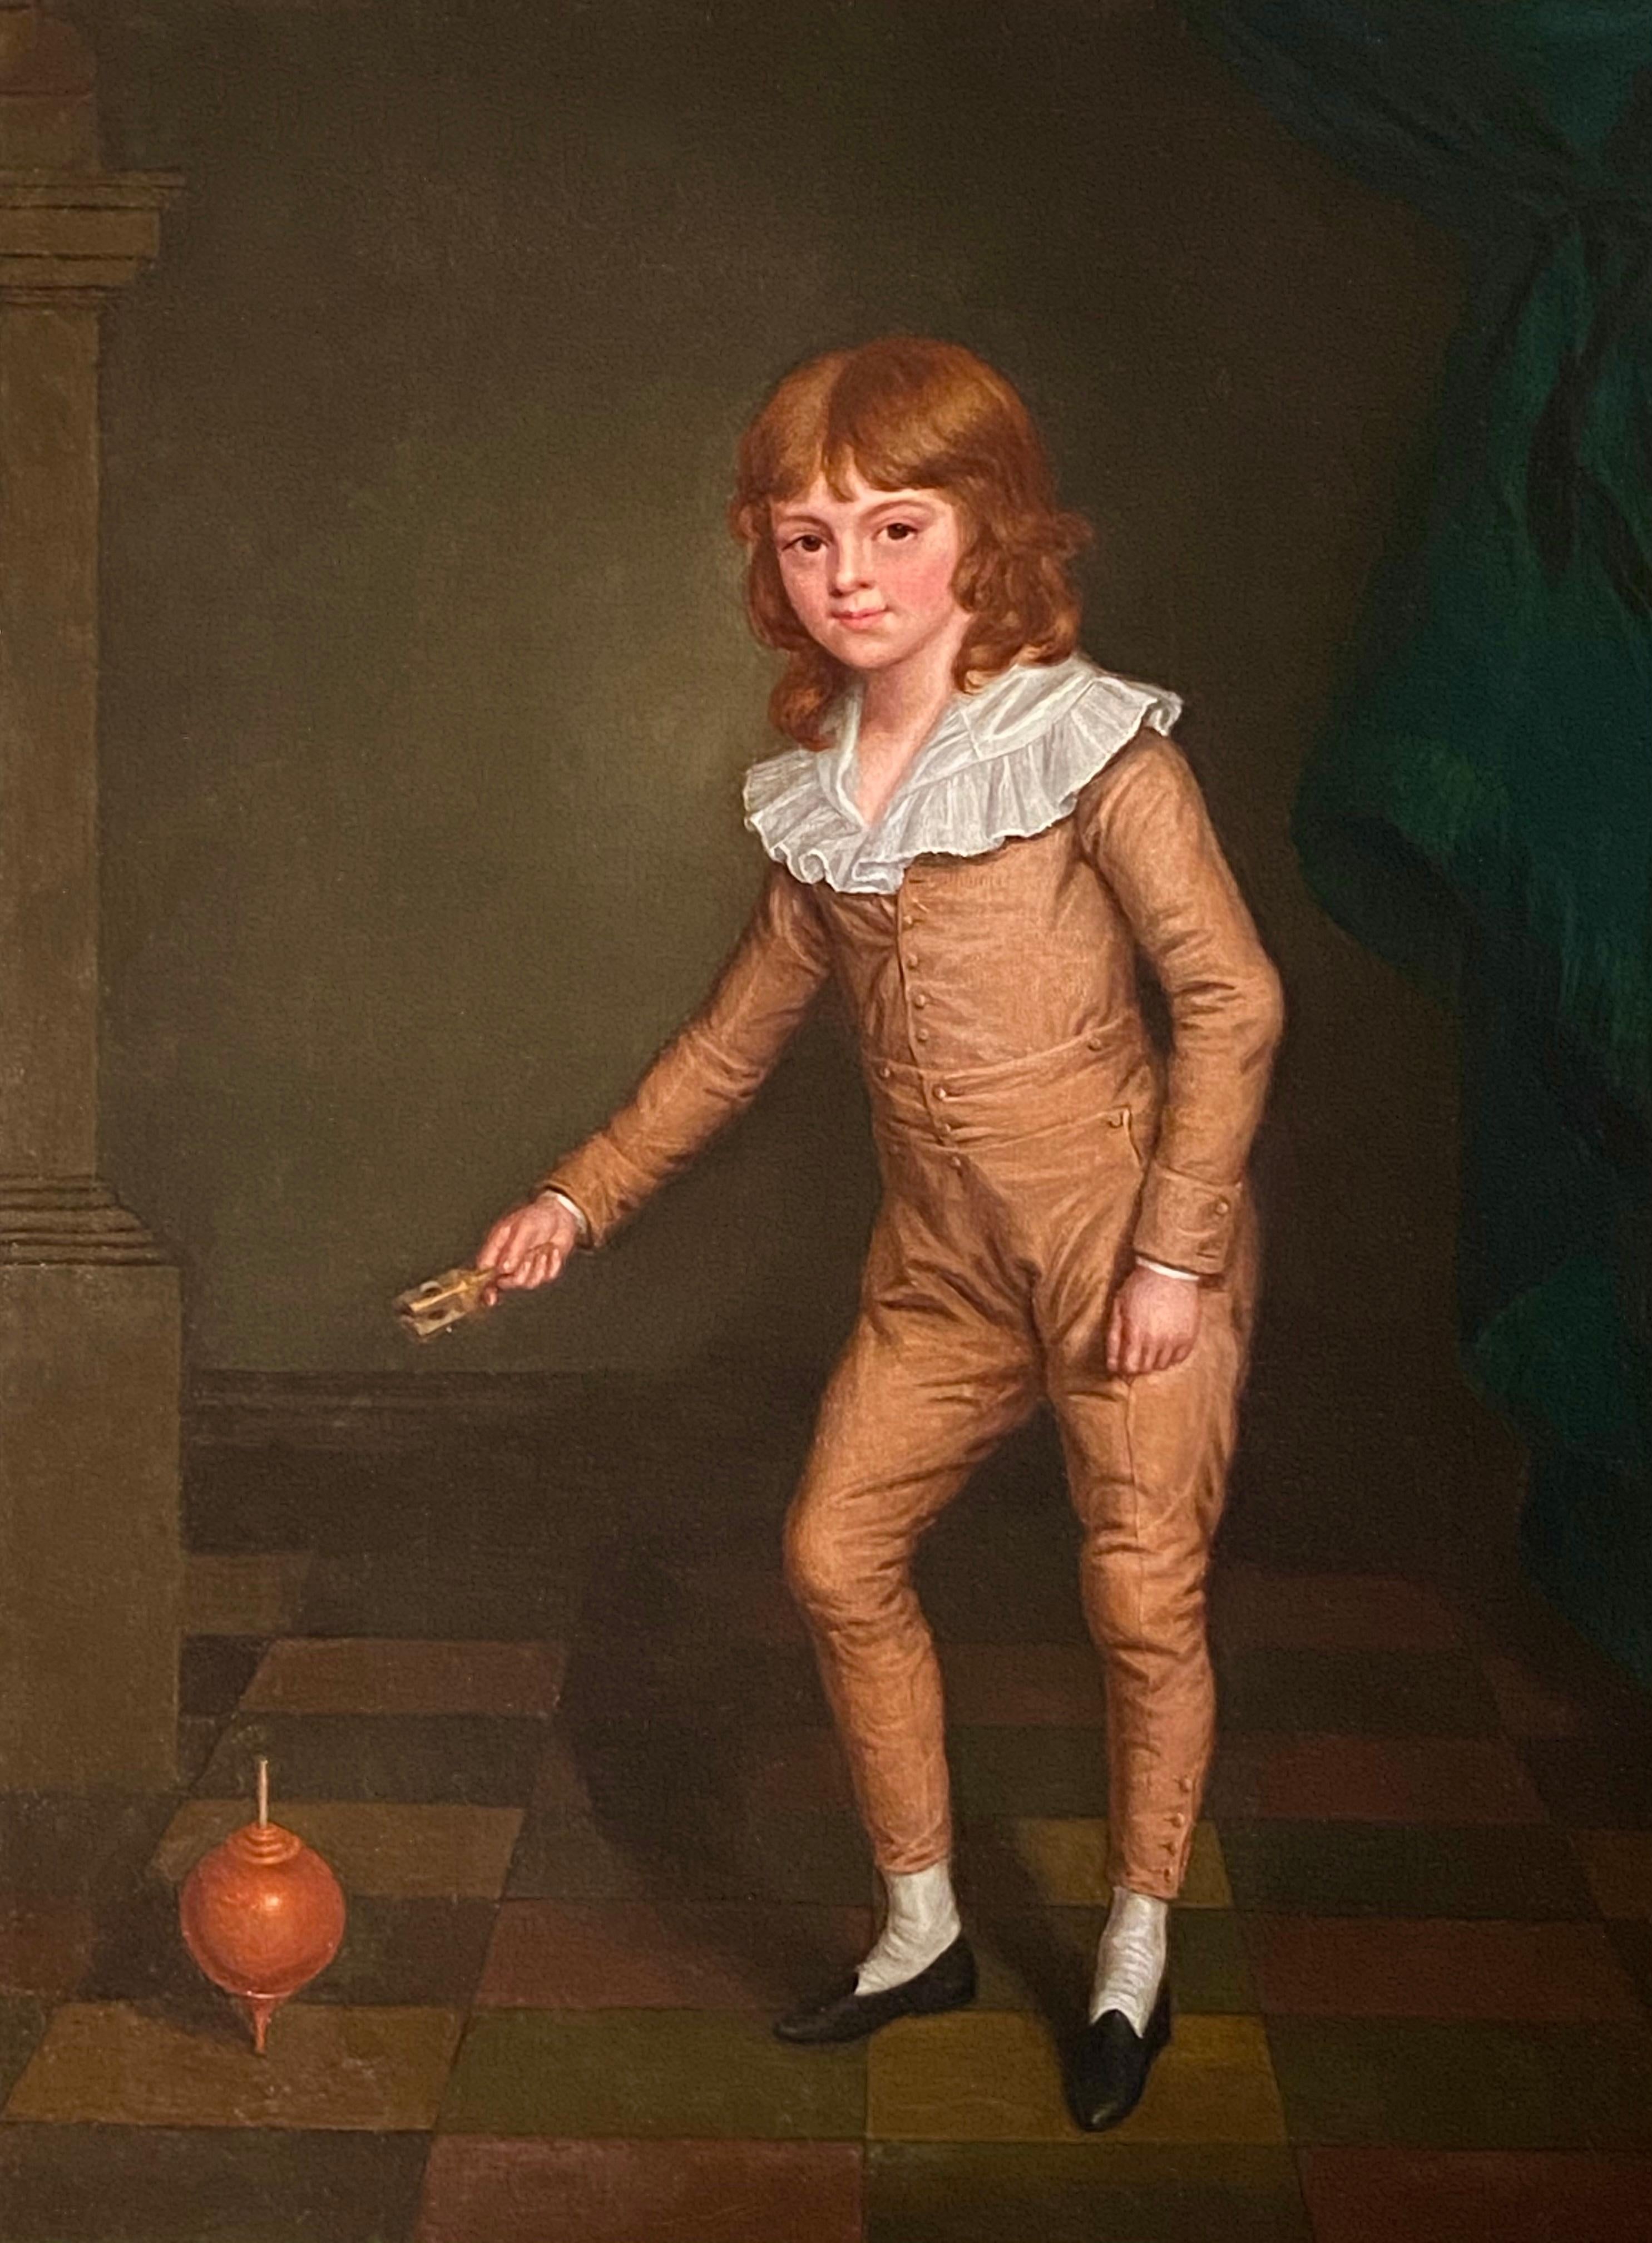 Sir John Hoppner Portrait Painting - 19th Century English Portrait of a Young Boy in a Orange Silk Suit